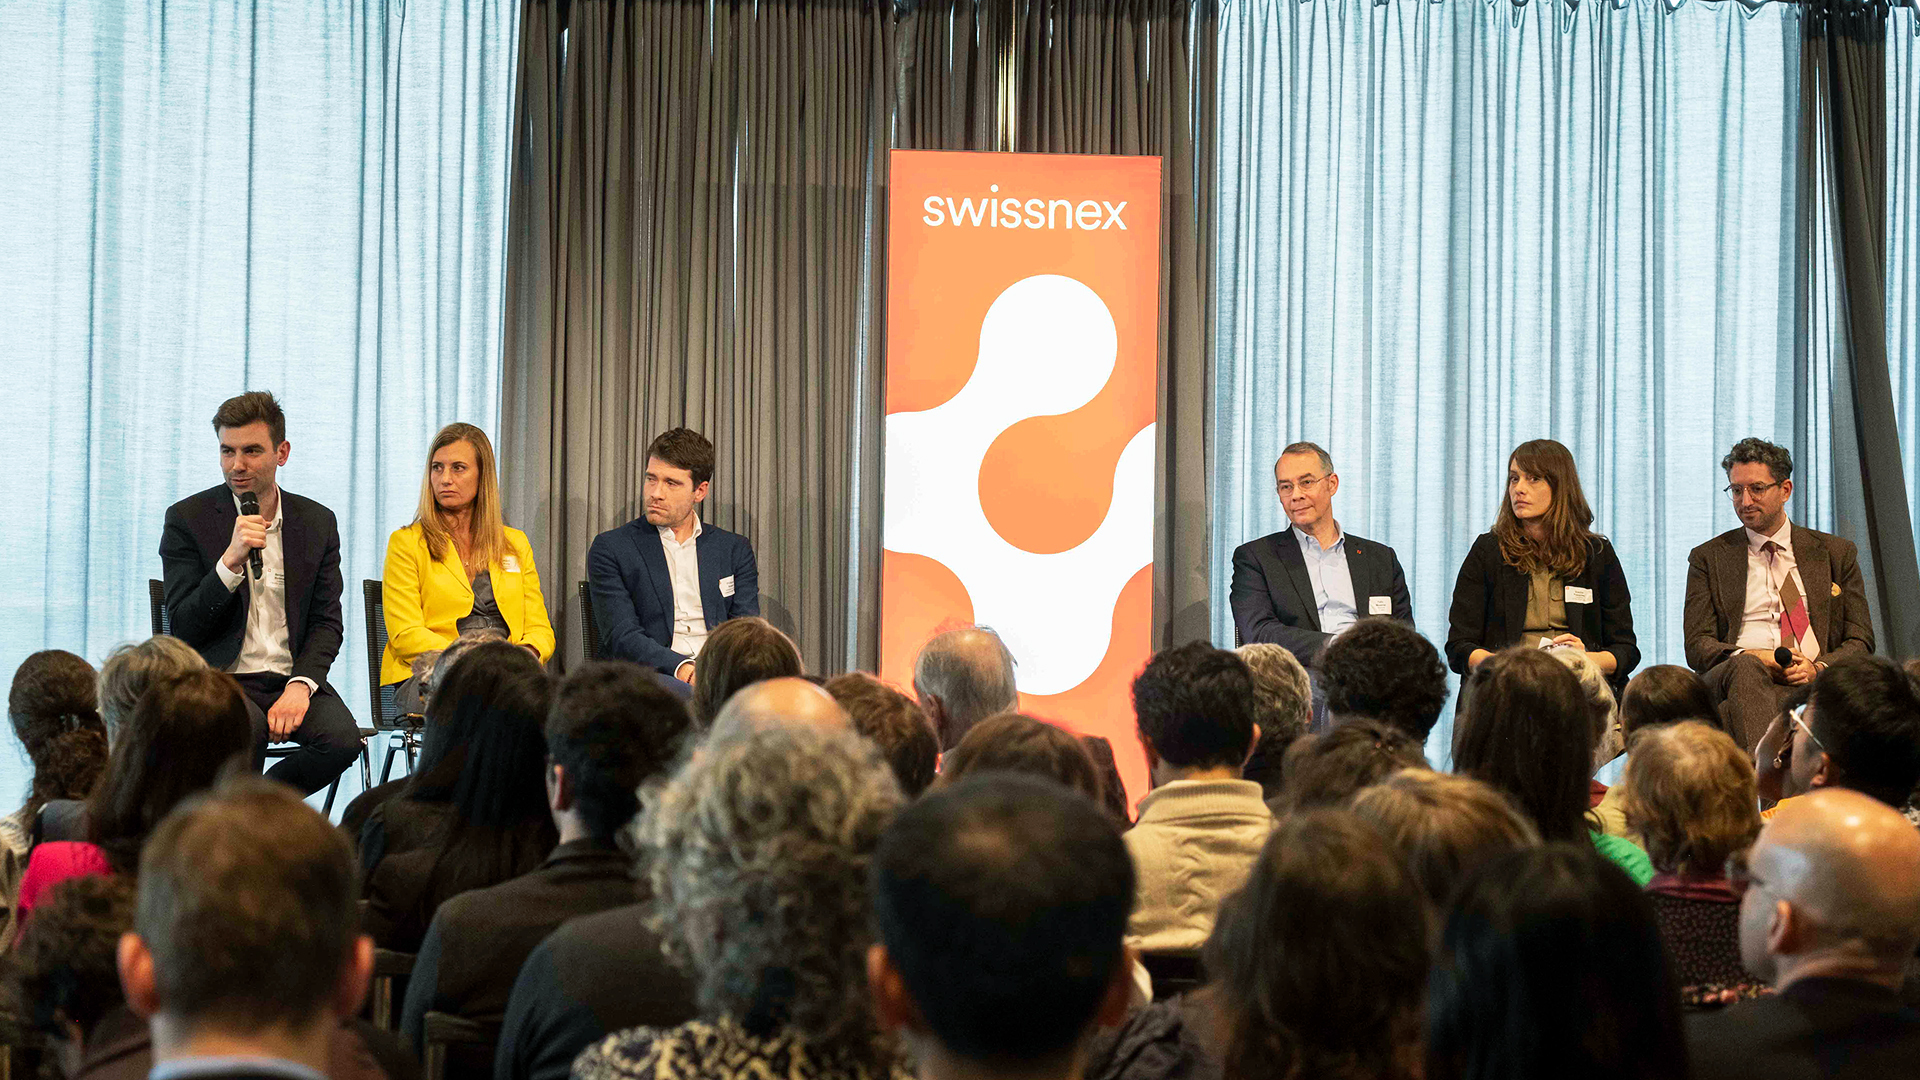 Six Swissnex CEOs are sat on stage around a red banner with the Swissnex logo. The heads of the audience can be seen on the bottom, the background of the stage is gray.